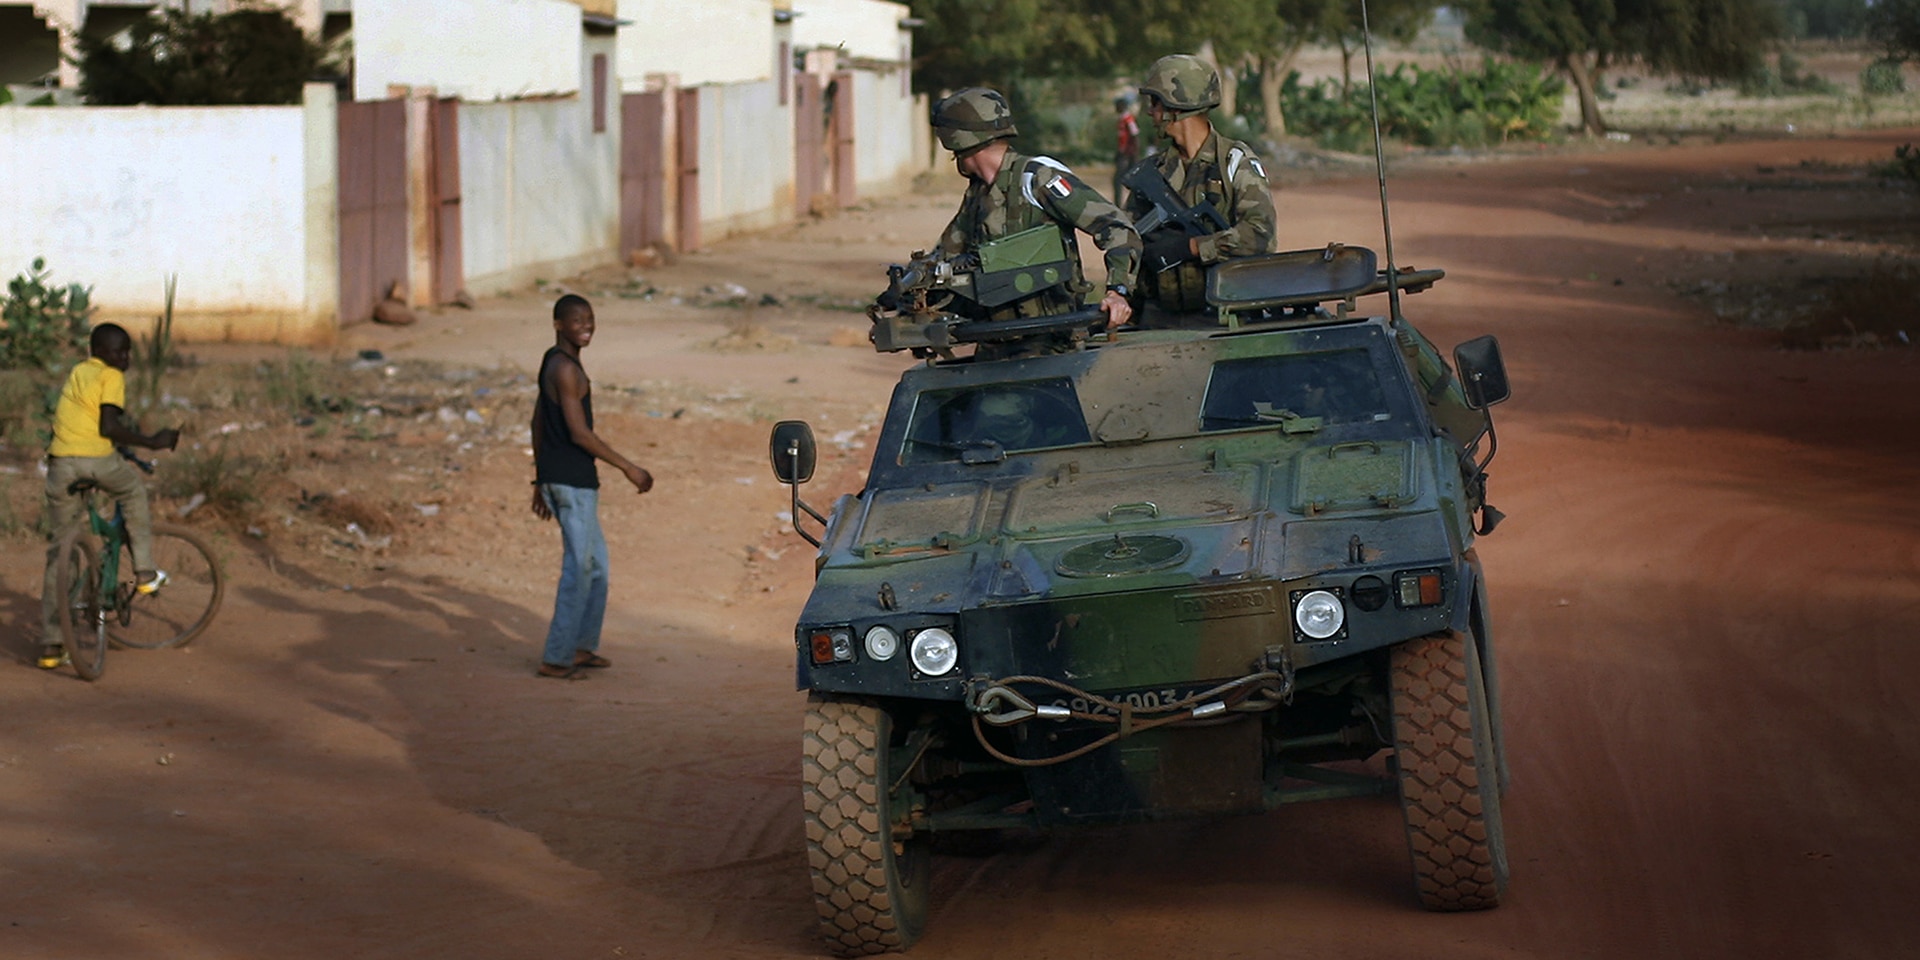 A military vehicle with two soldiers drives past young men in the conflict region of Mali.